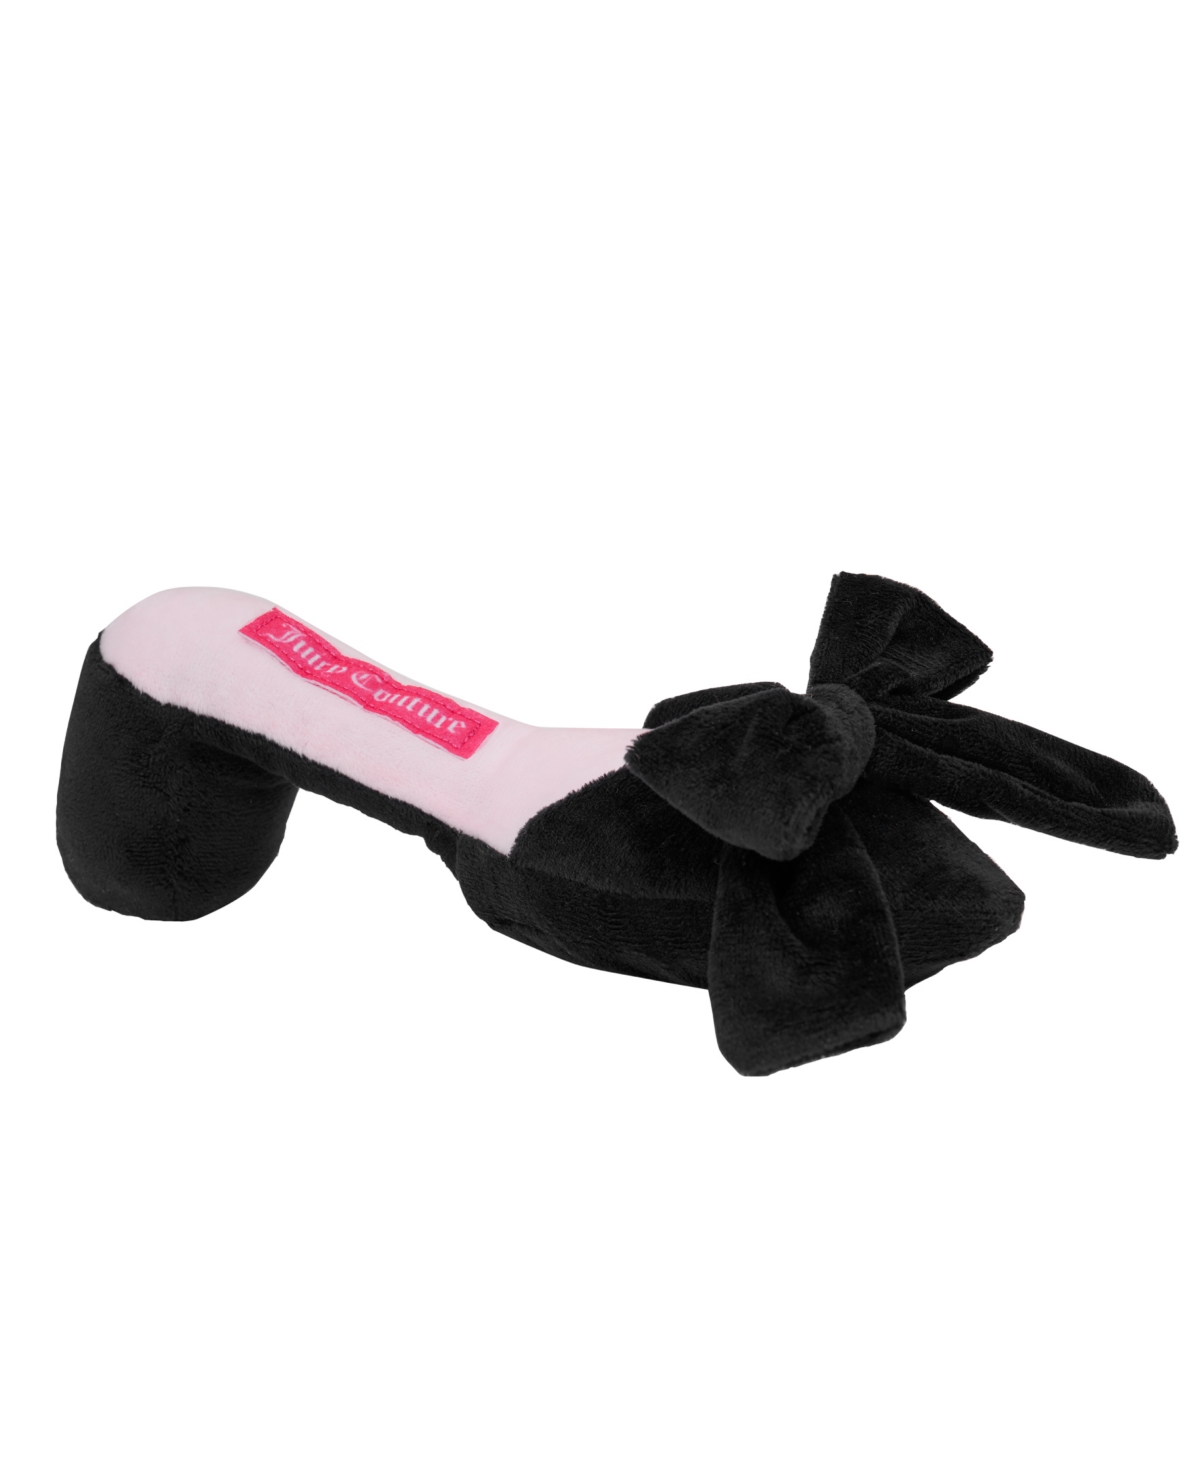 Plush Haute Couture High Heel Shoe Shaped Squeaky Pet Toy - Black